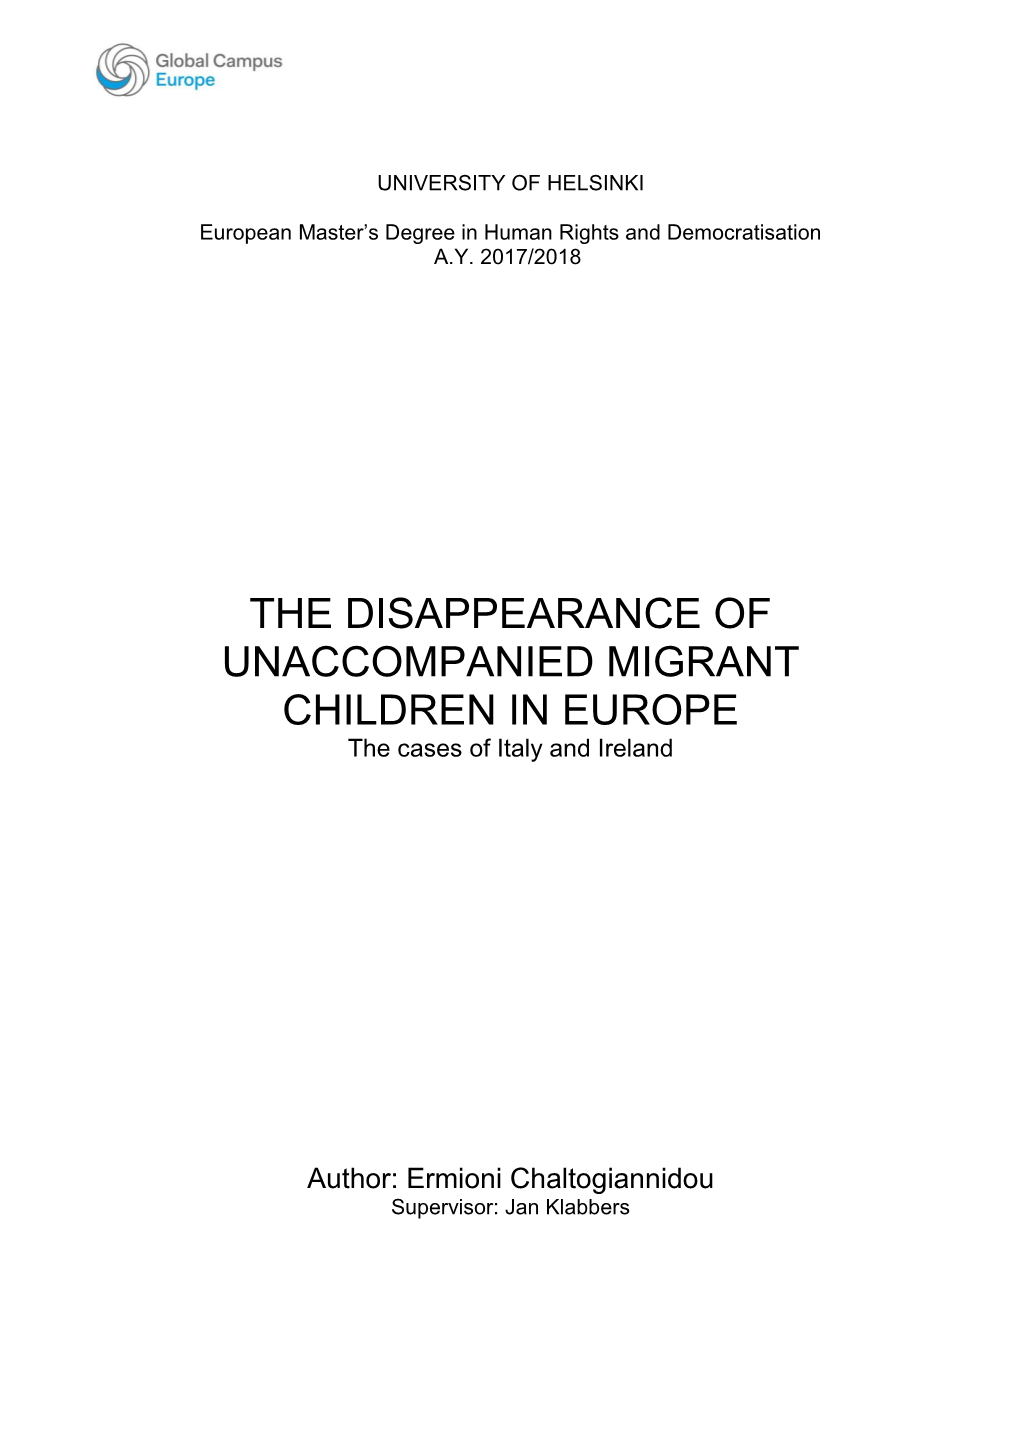 THE DISAPPEARANCE of UNACCOMPANIED MIGRANT CHILDREN in EUROPE the Cases of Italy and Ireland